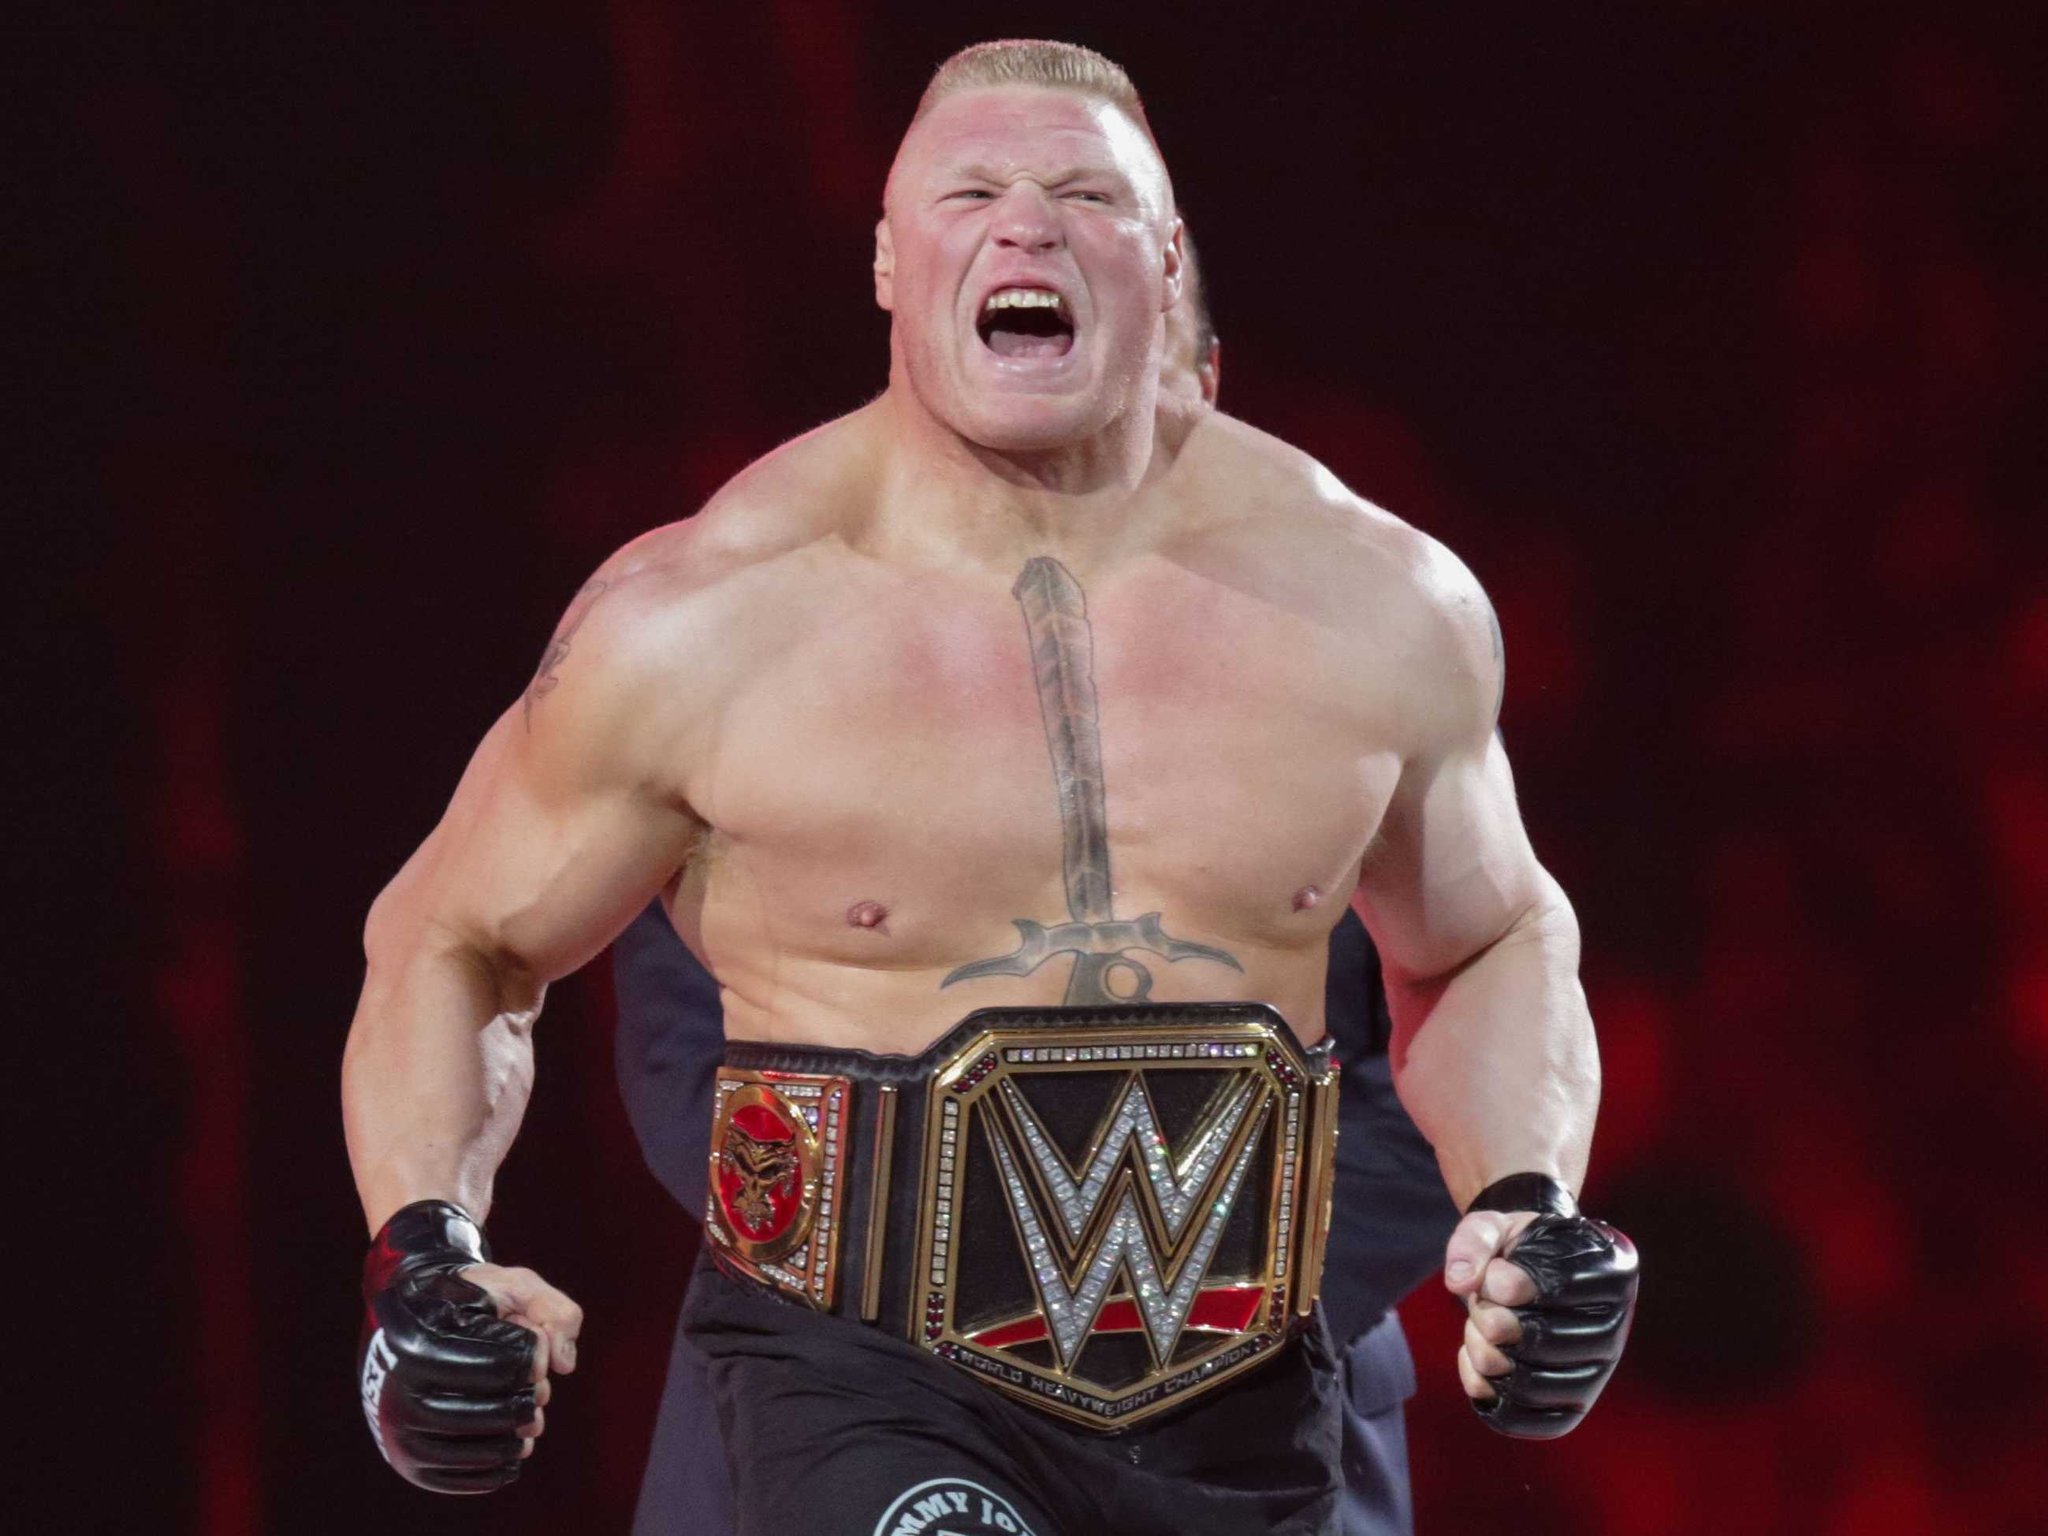 Happy Birthday to Brock Lesnar. Can\t believe he\s now 40, but the guy\s still a freak of nature and a legit badass 